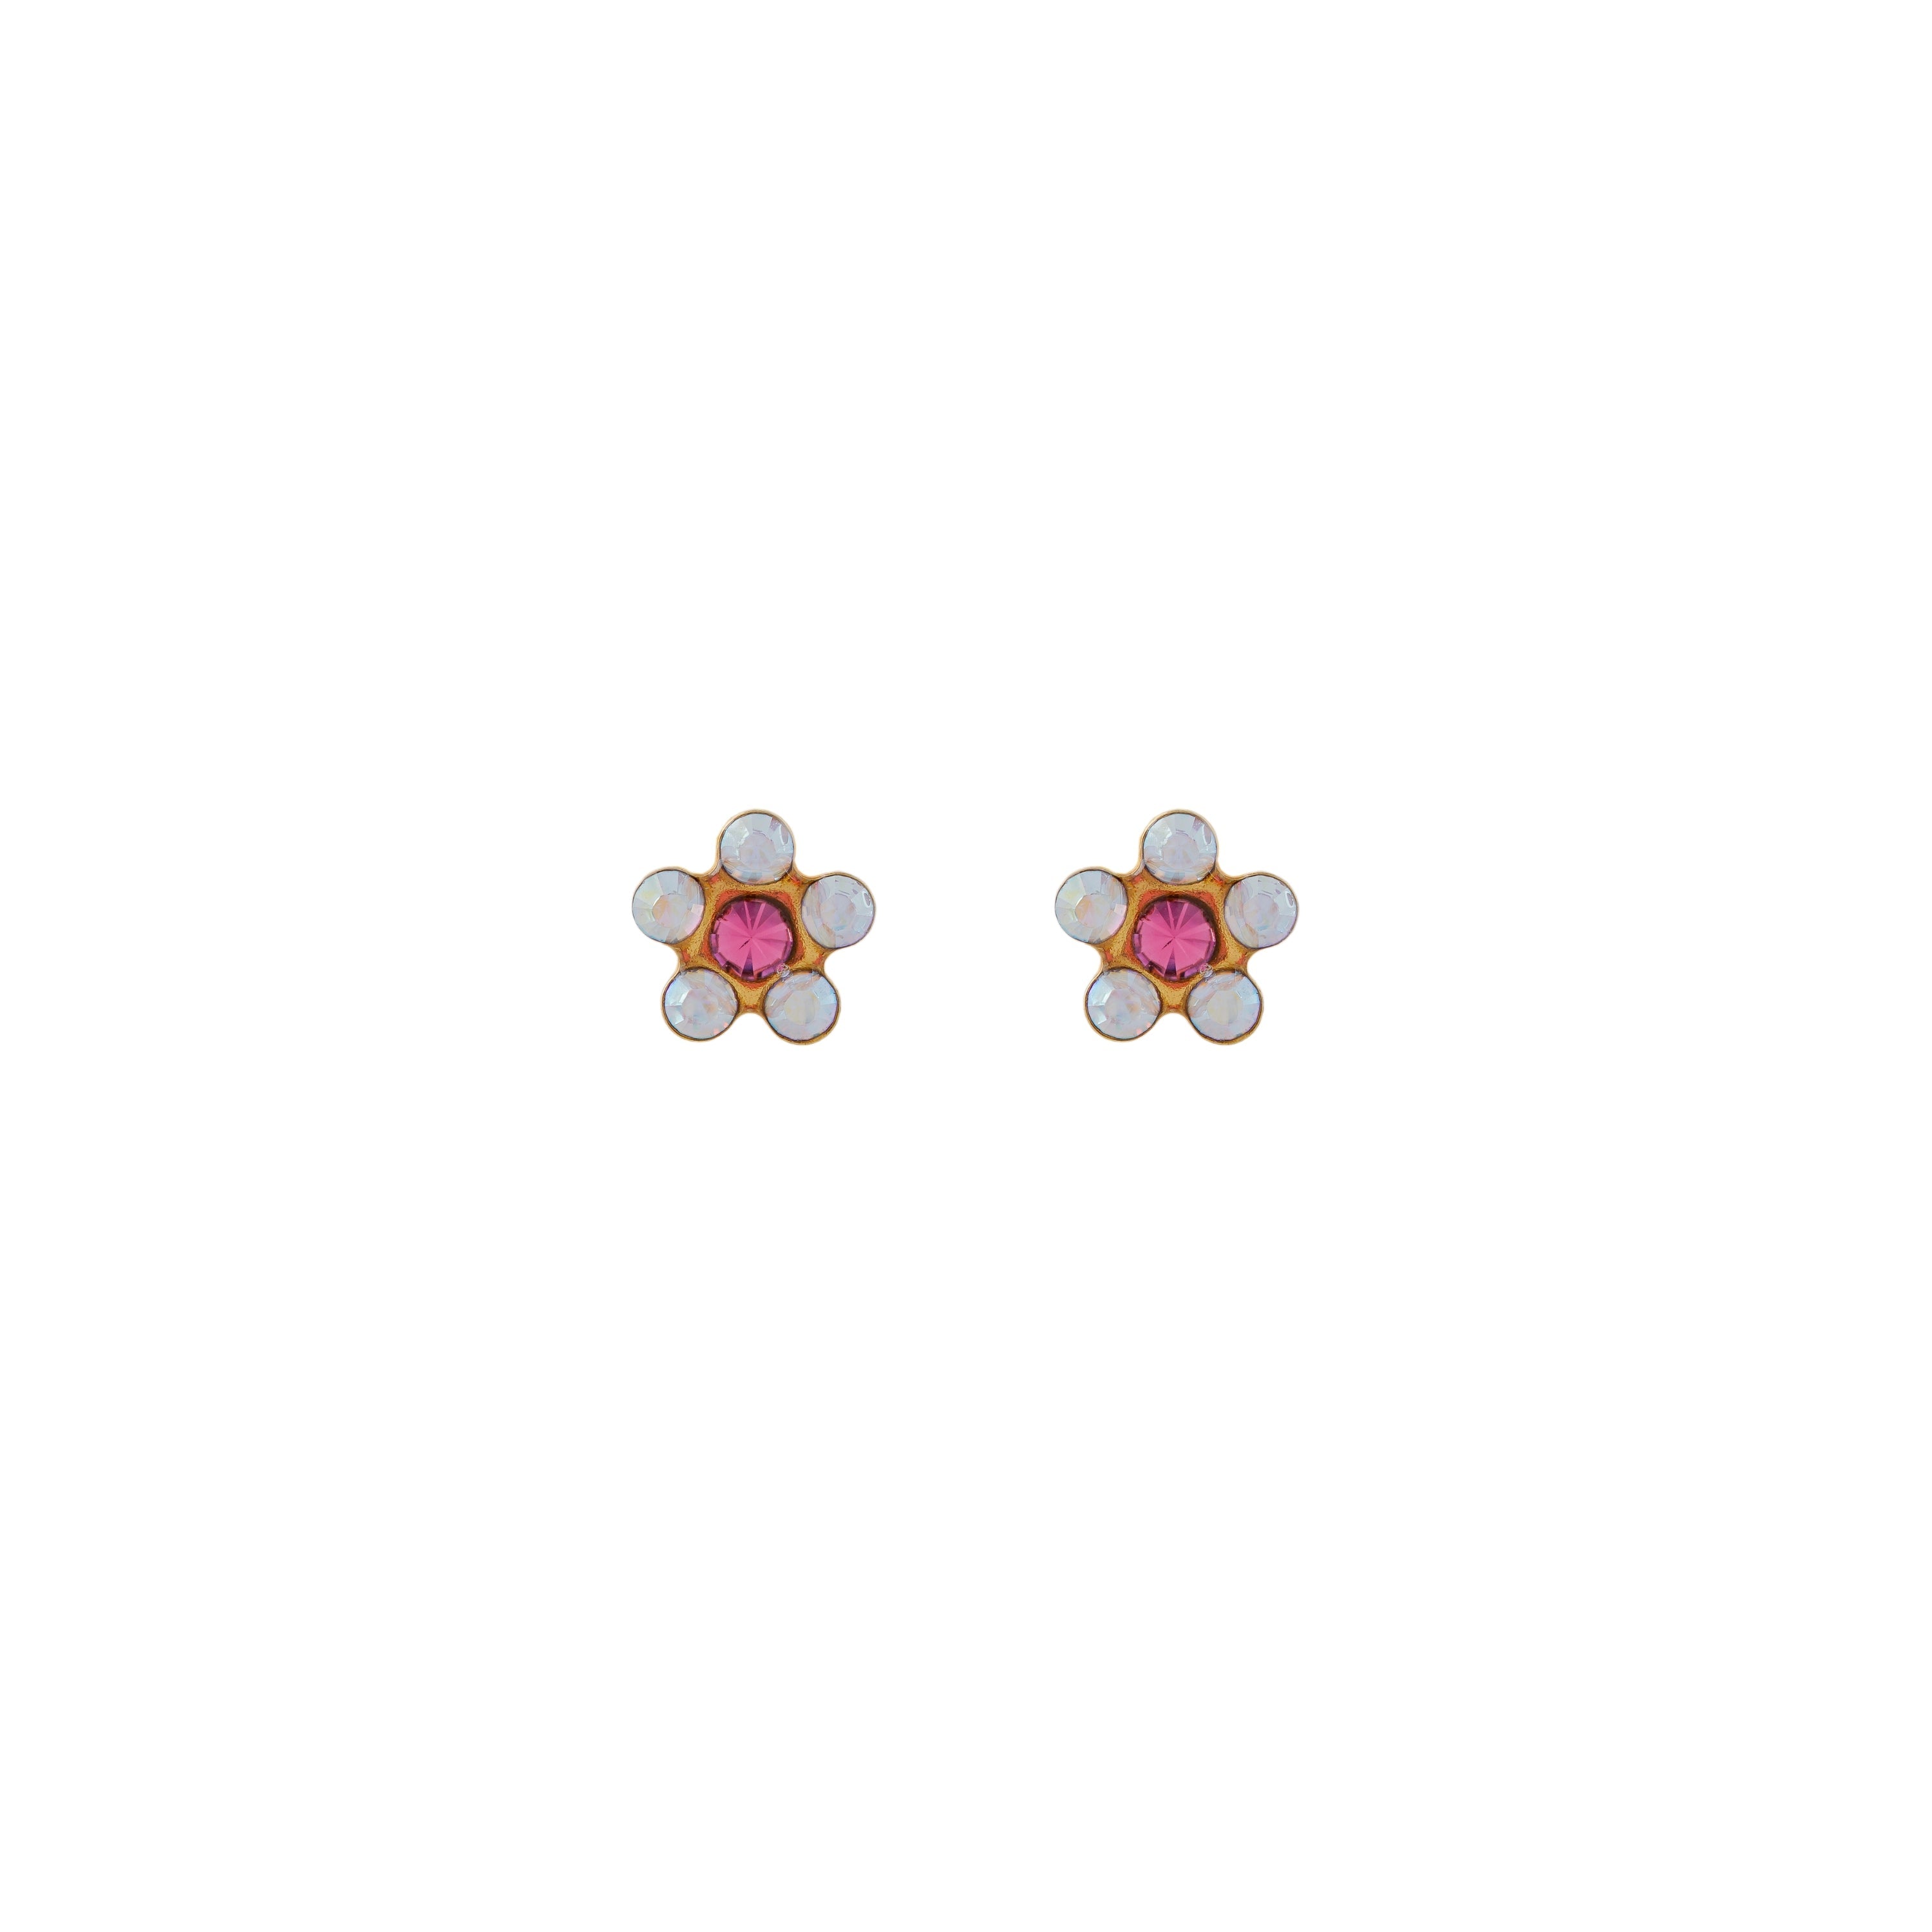 Daisy Ab Crystal-Rose 24K Pure Gold Plated Ear Studs | MADE IN USA | Ideal for everyday wear